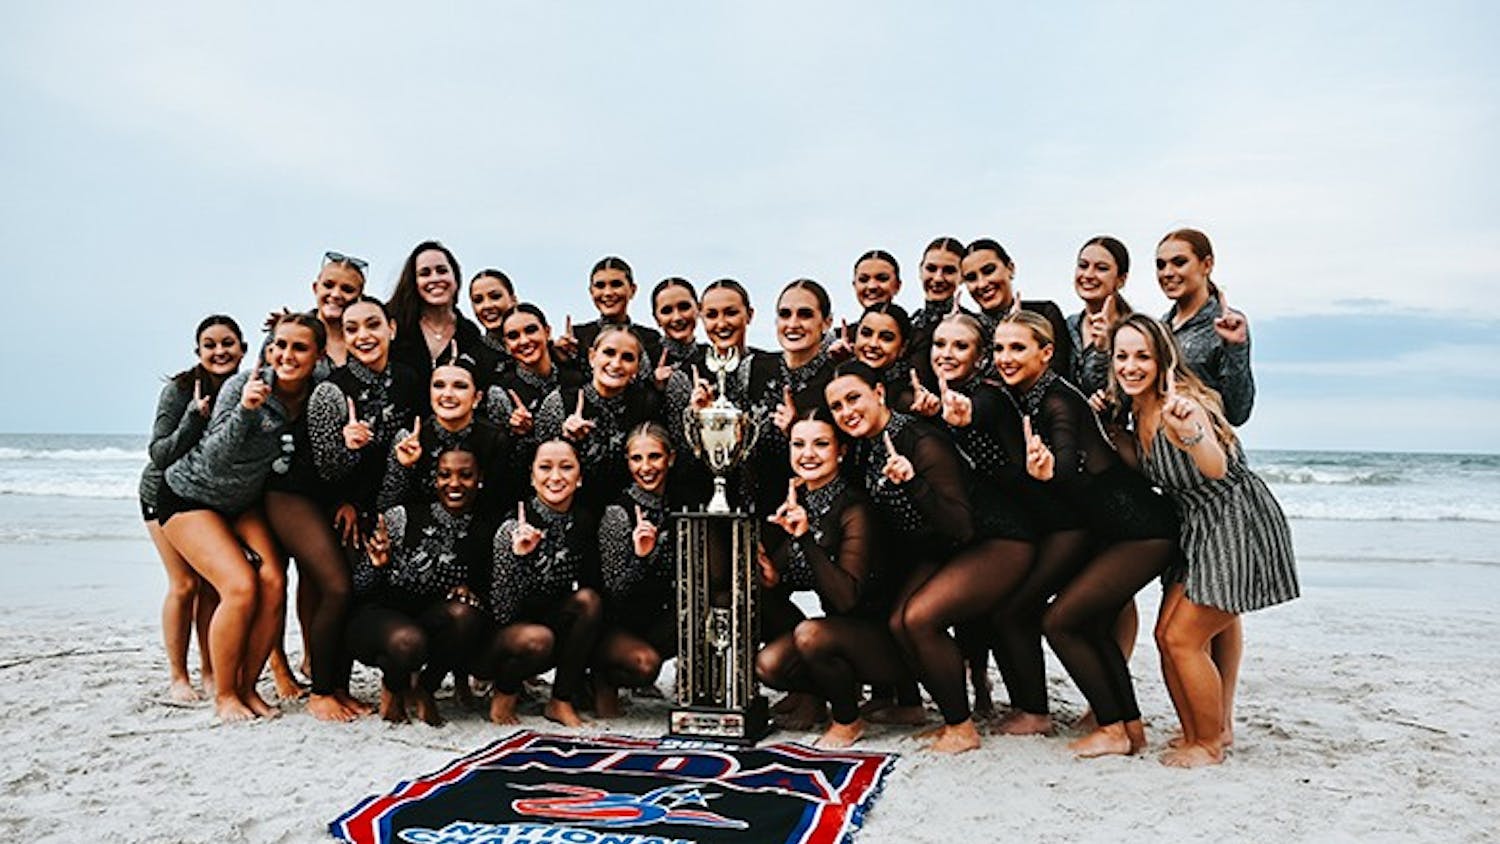 The Carolina Girls dance team posing with the National Championship trophy.